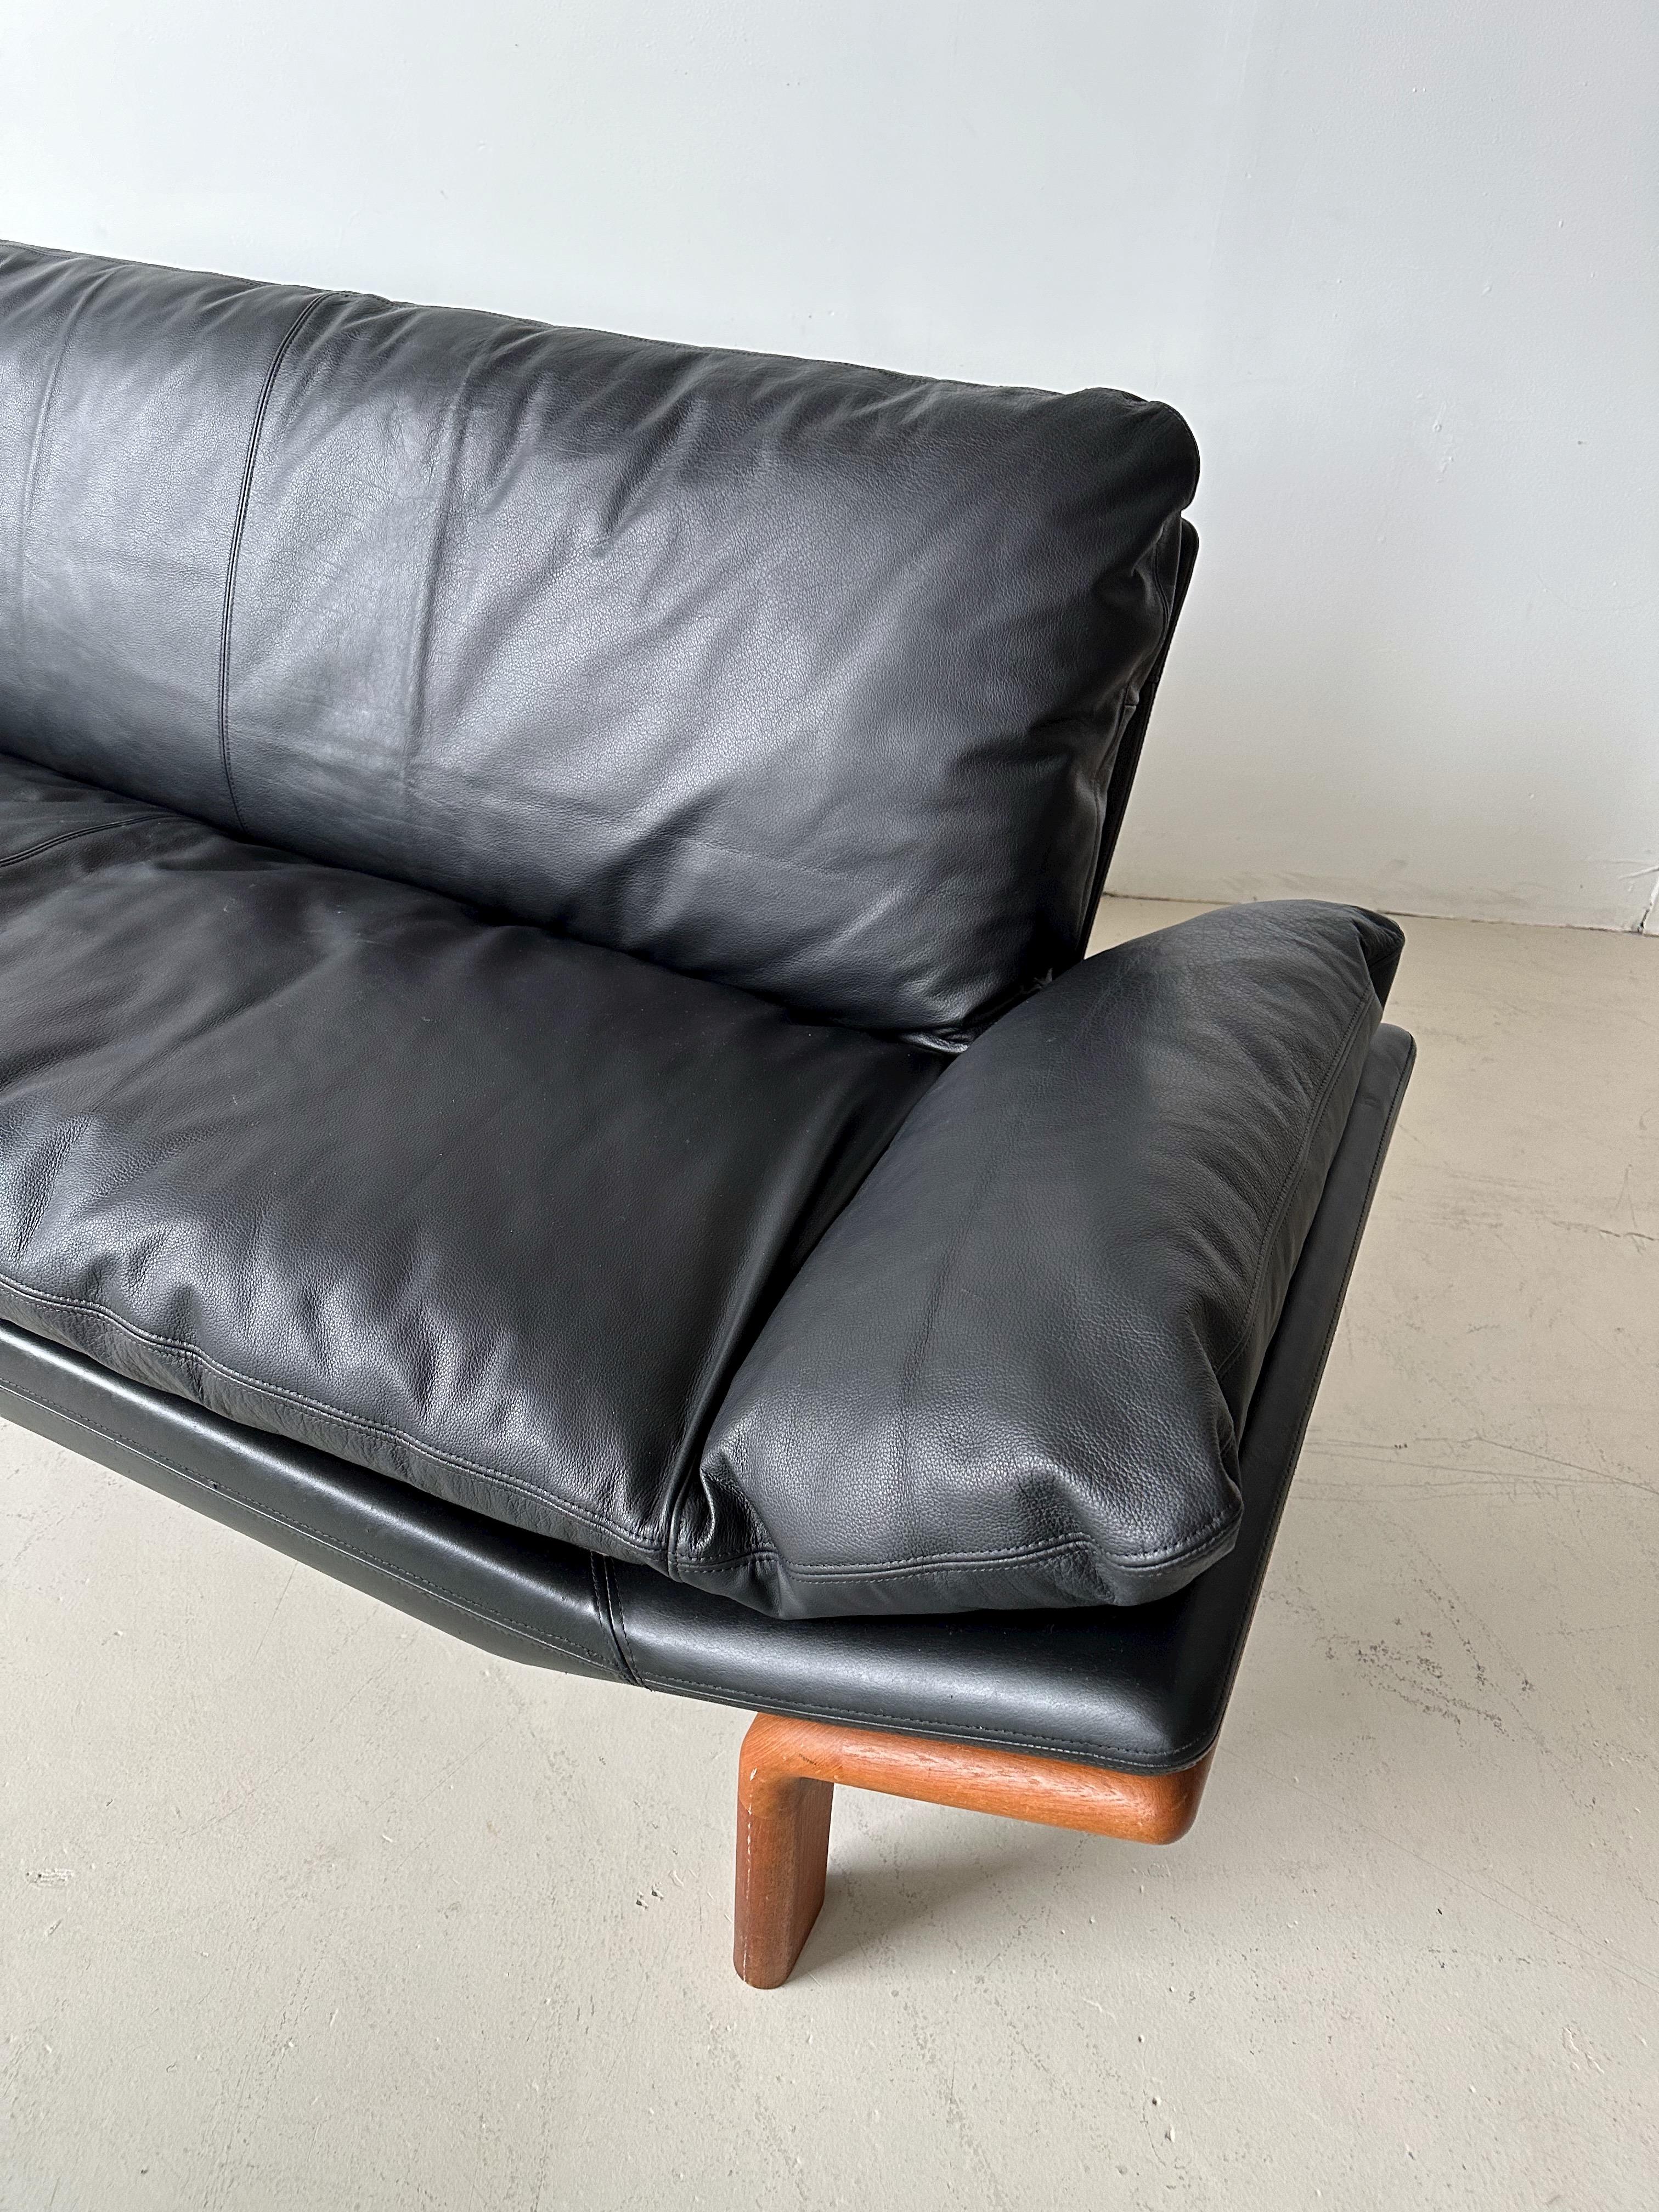 Mid-Century Modern Black Leather 3 Seater Sofa with Solid Teak Frame by Komfort Denmark For Sale